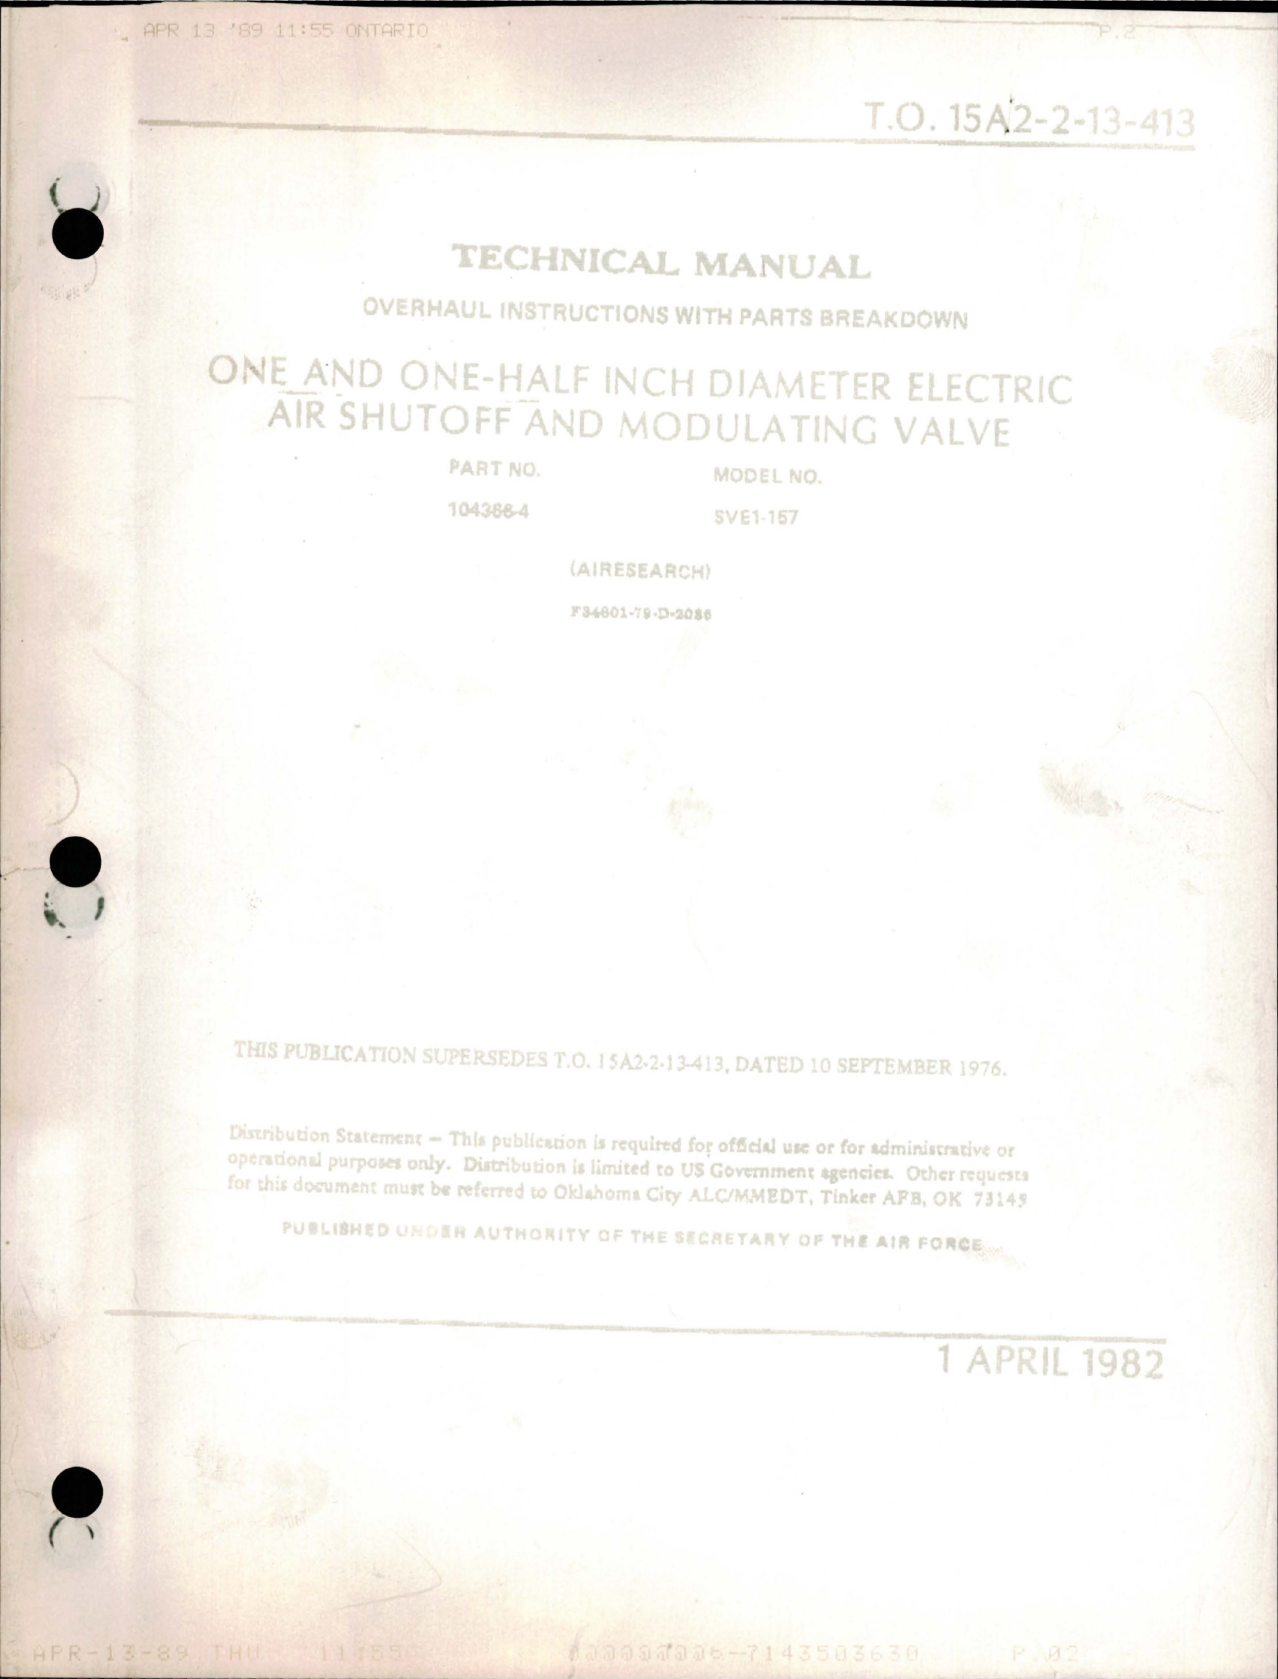 Sample page 1 from AirCorps Library document: Overhaul Instructions with Parts for One and one Half inch Diameter Electric Air Shutoff and Modulating Valve - 104366-4 - Model SVE1-157